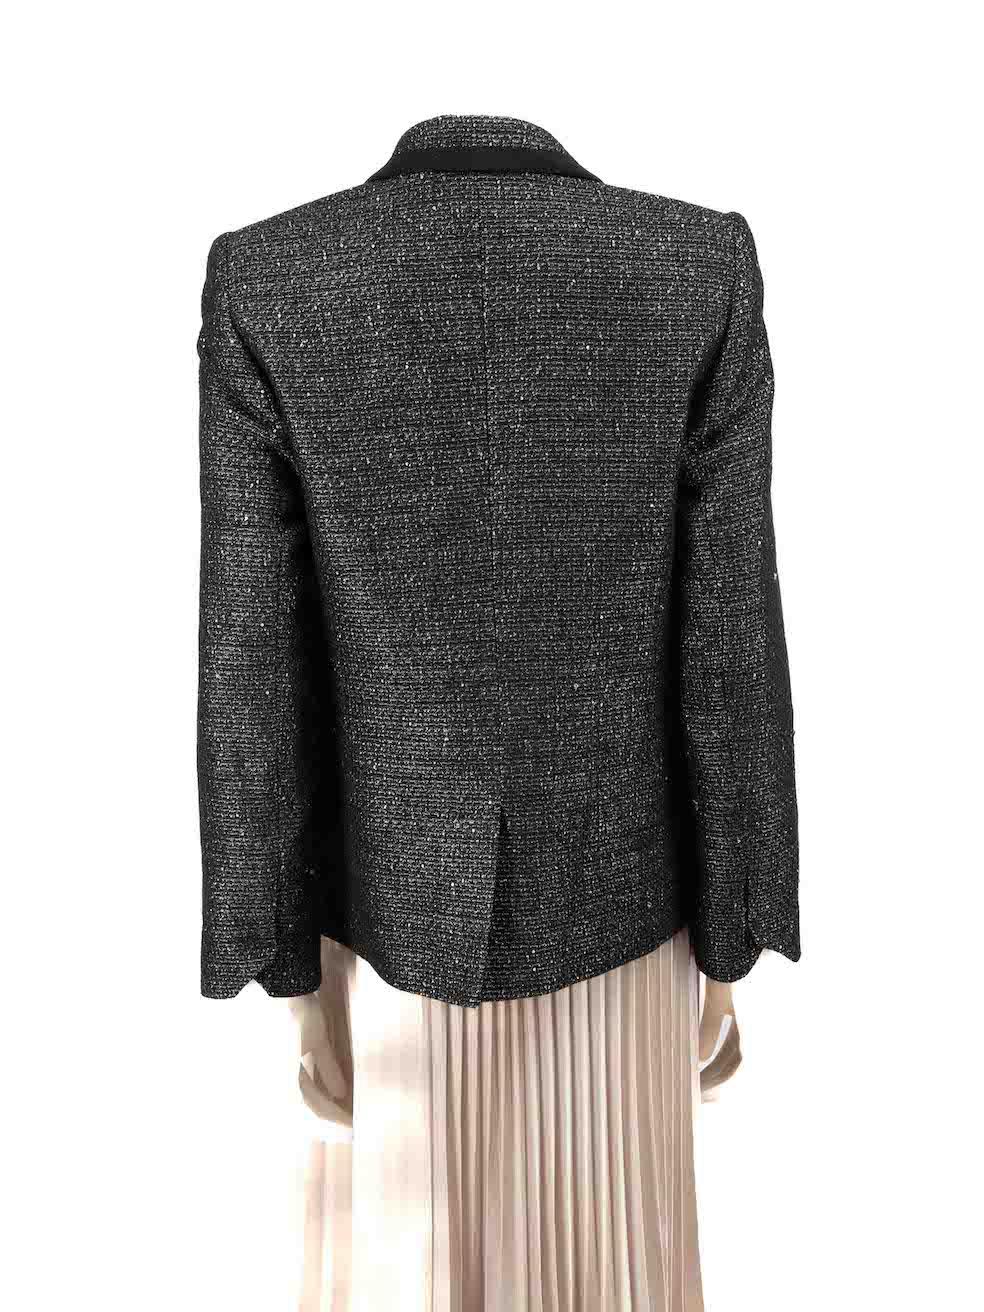 Zadig & Voltaire Black Sequinned Metallic Blazer Size M In Good Condition For Sale In London, GB